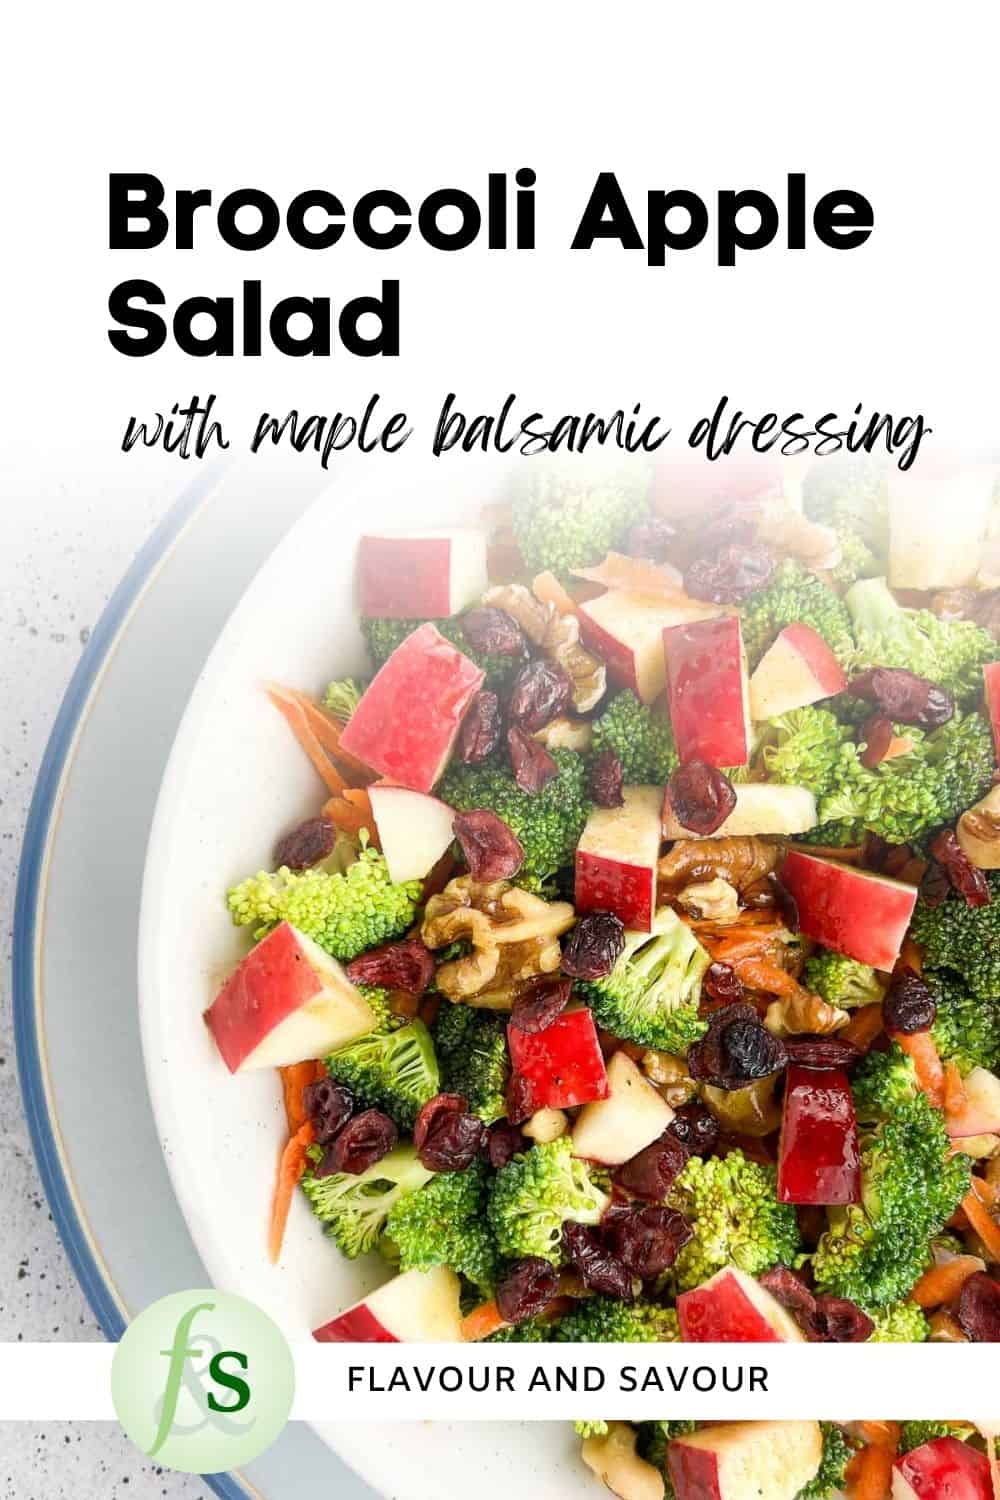 Image with text overlay for broccoli apple salad with maple dressing.